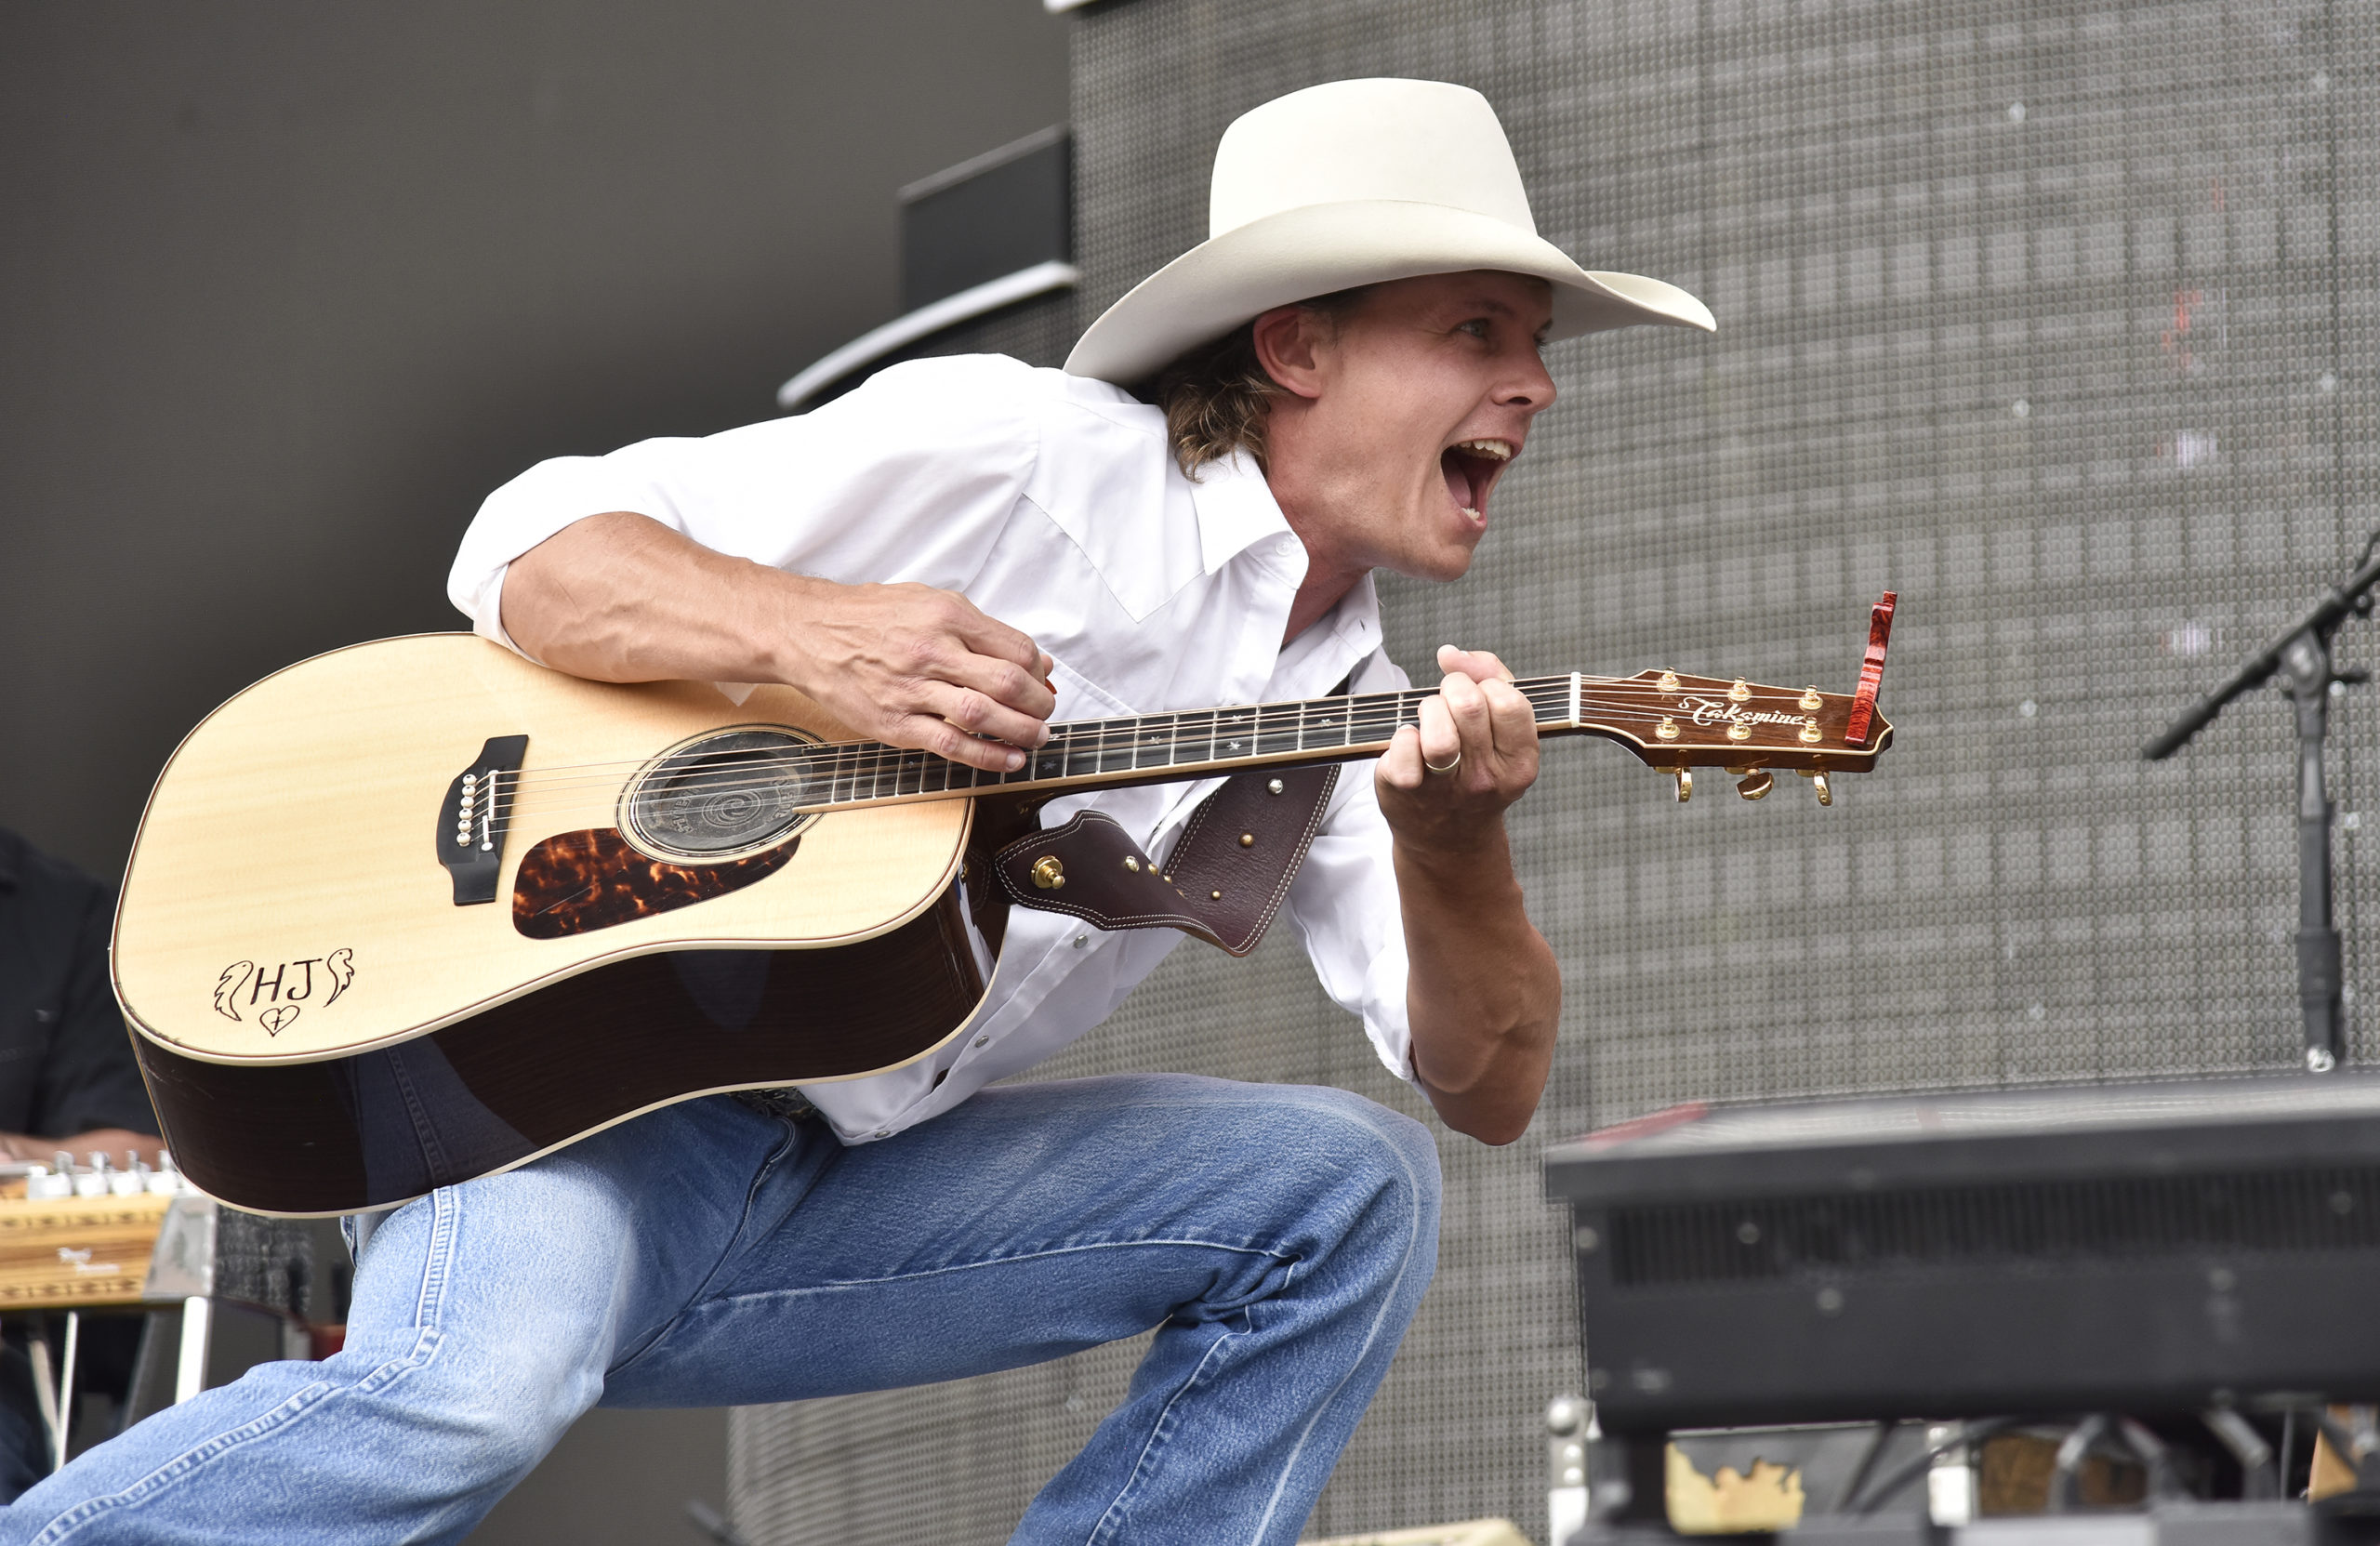 Ned LeDoux performs during the 2021 Watershed music festival at Gorge Amphitheatre on July 31, 2021 in George, Washington. 